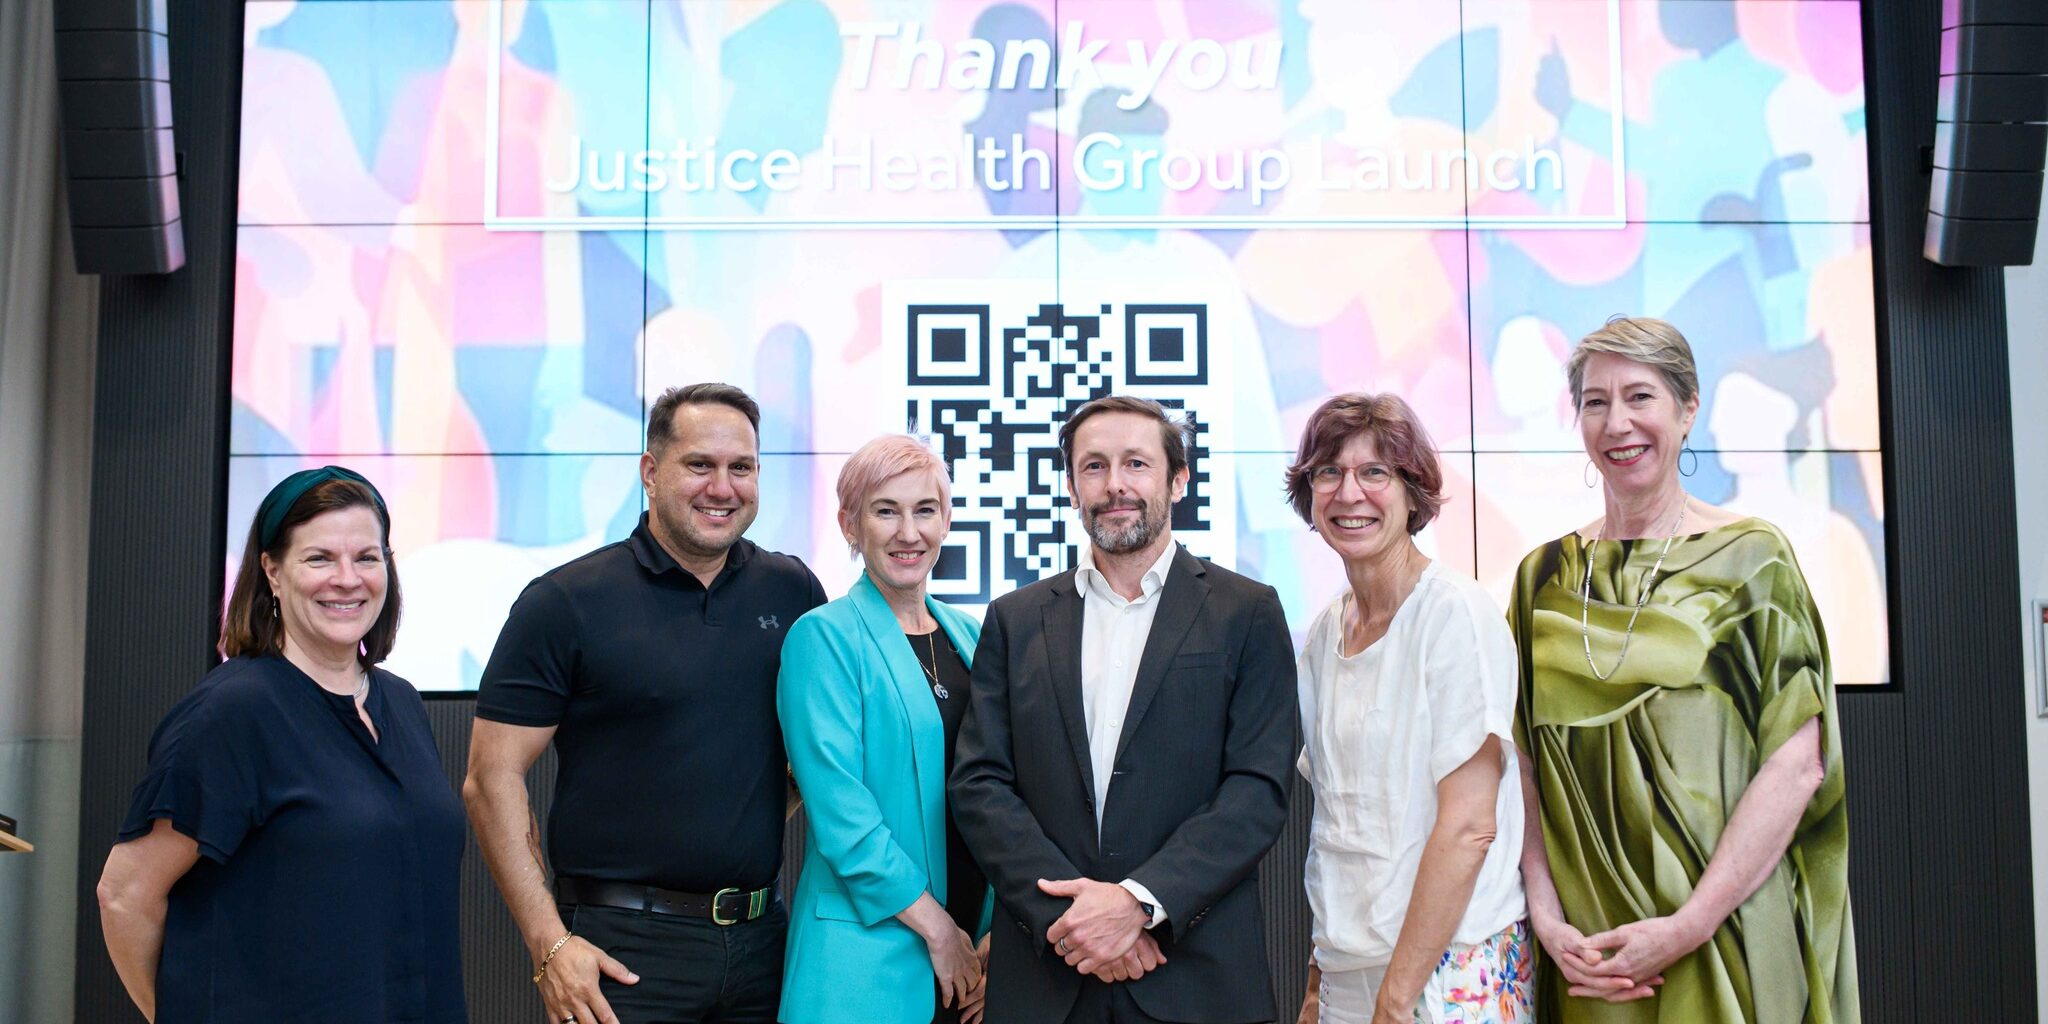 Launch of the Justice Health Group